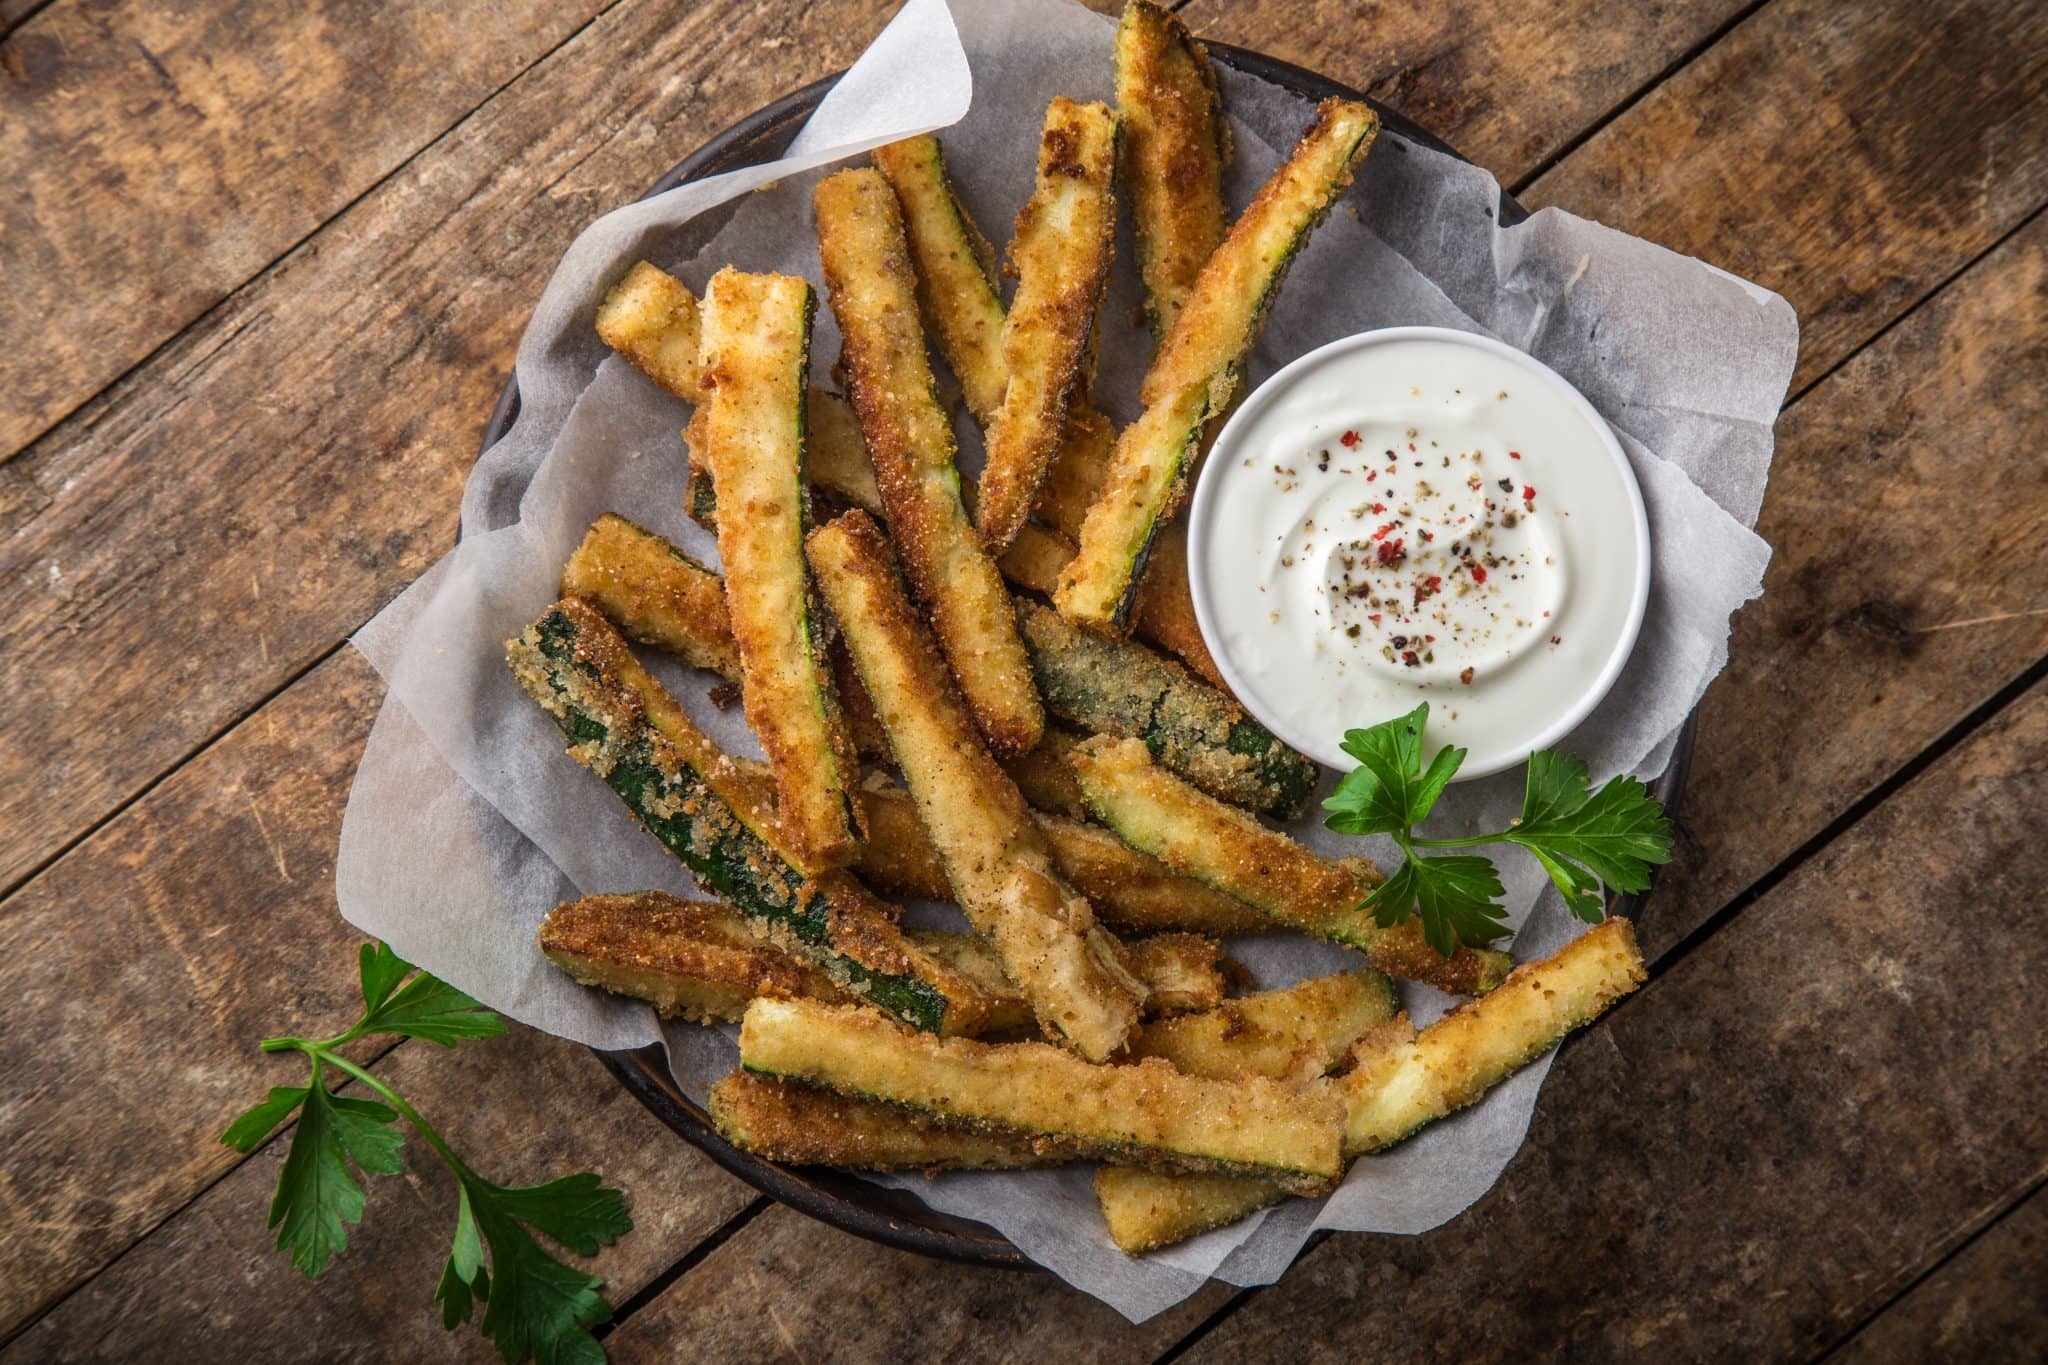 Overhead view of a plate of baked zucchini sticks with ranch dressing